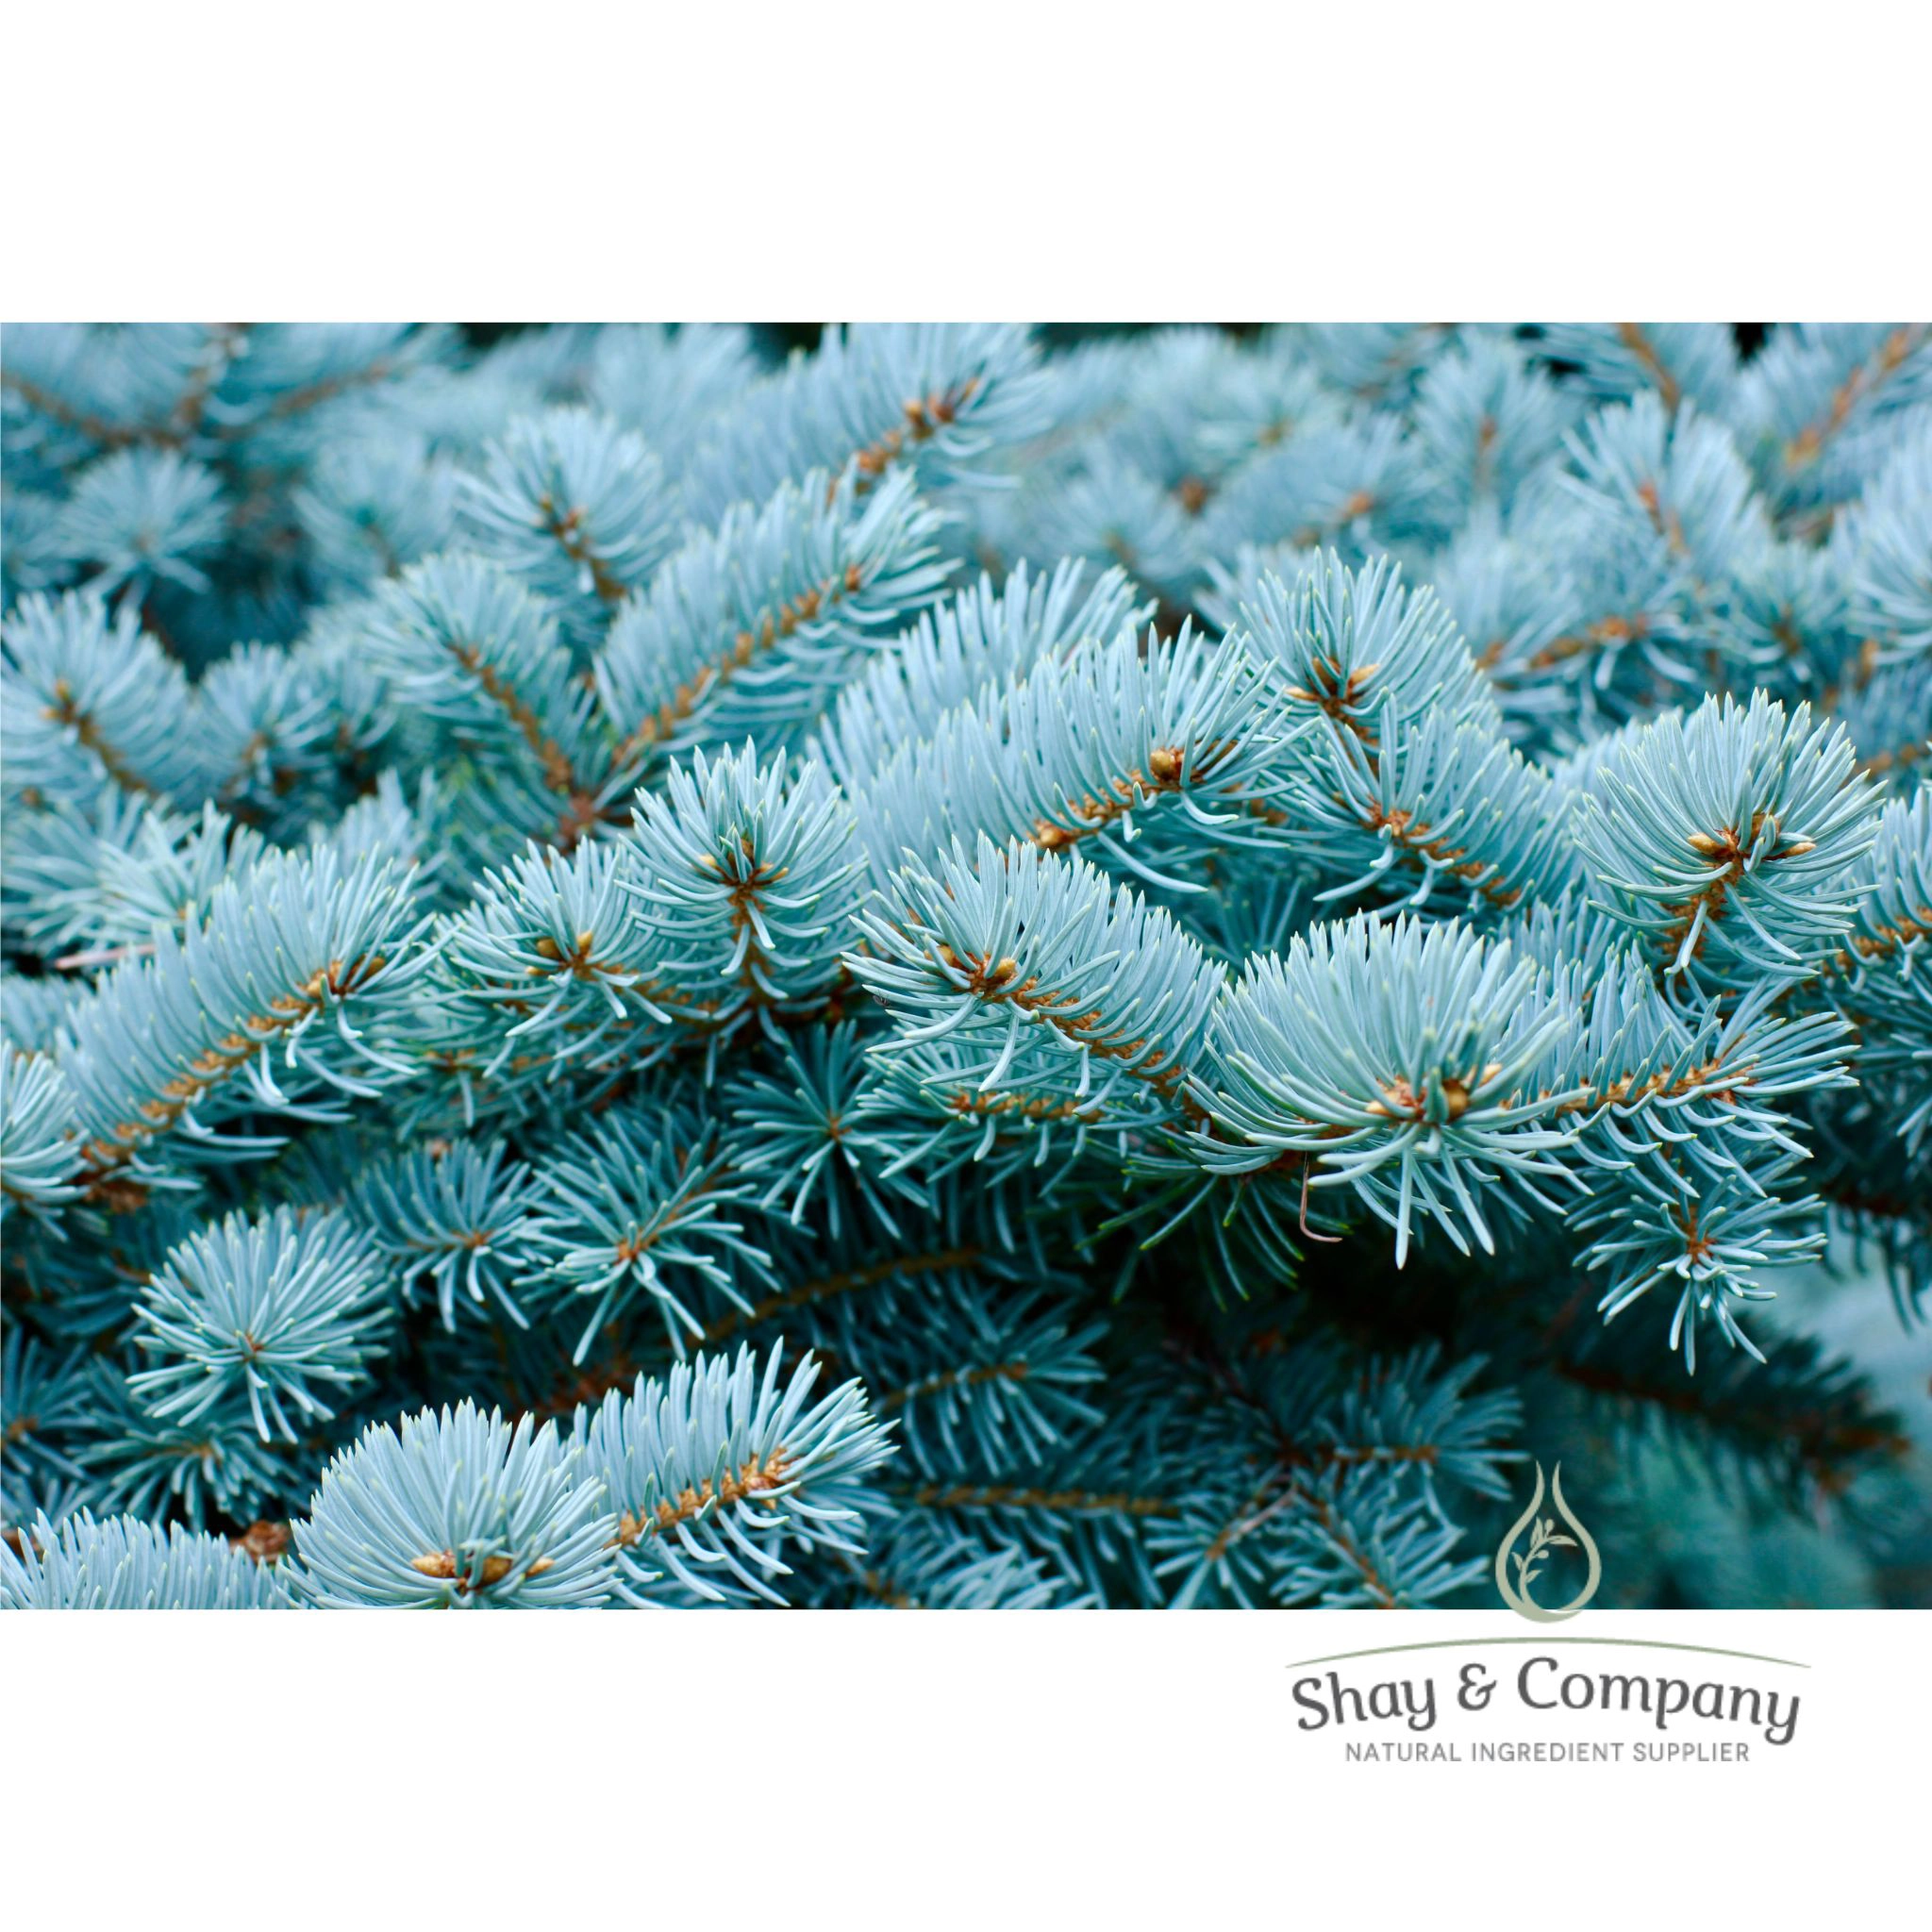 Inc　Fragrance　Spruce　Natural　All　Blue　Company　Shay　and